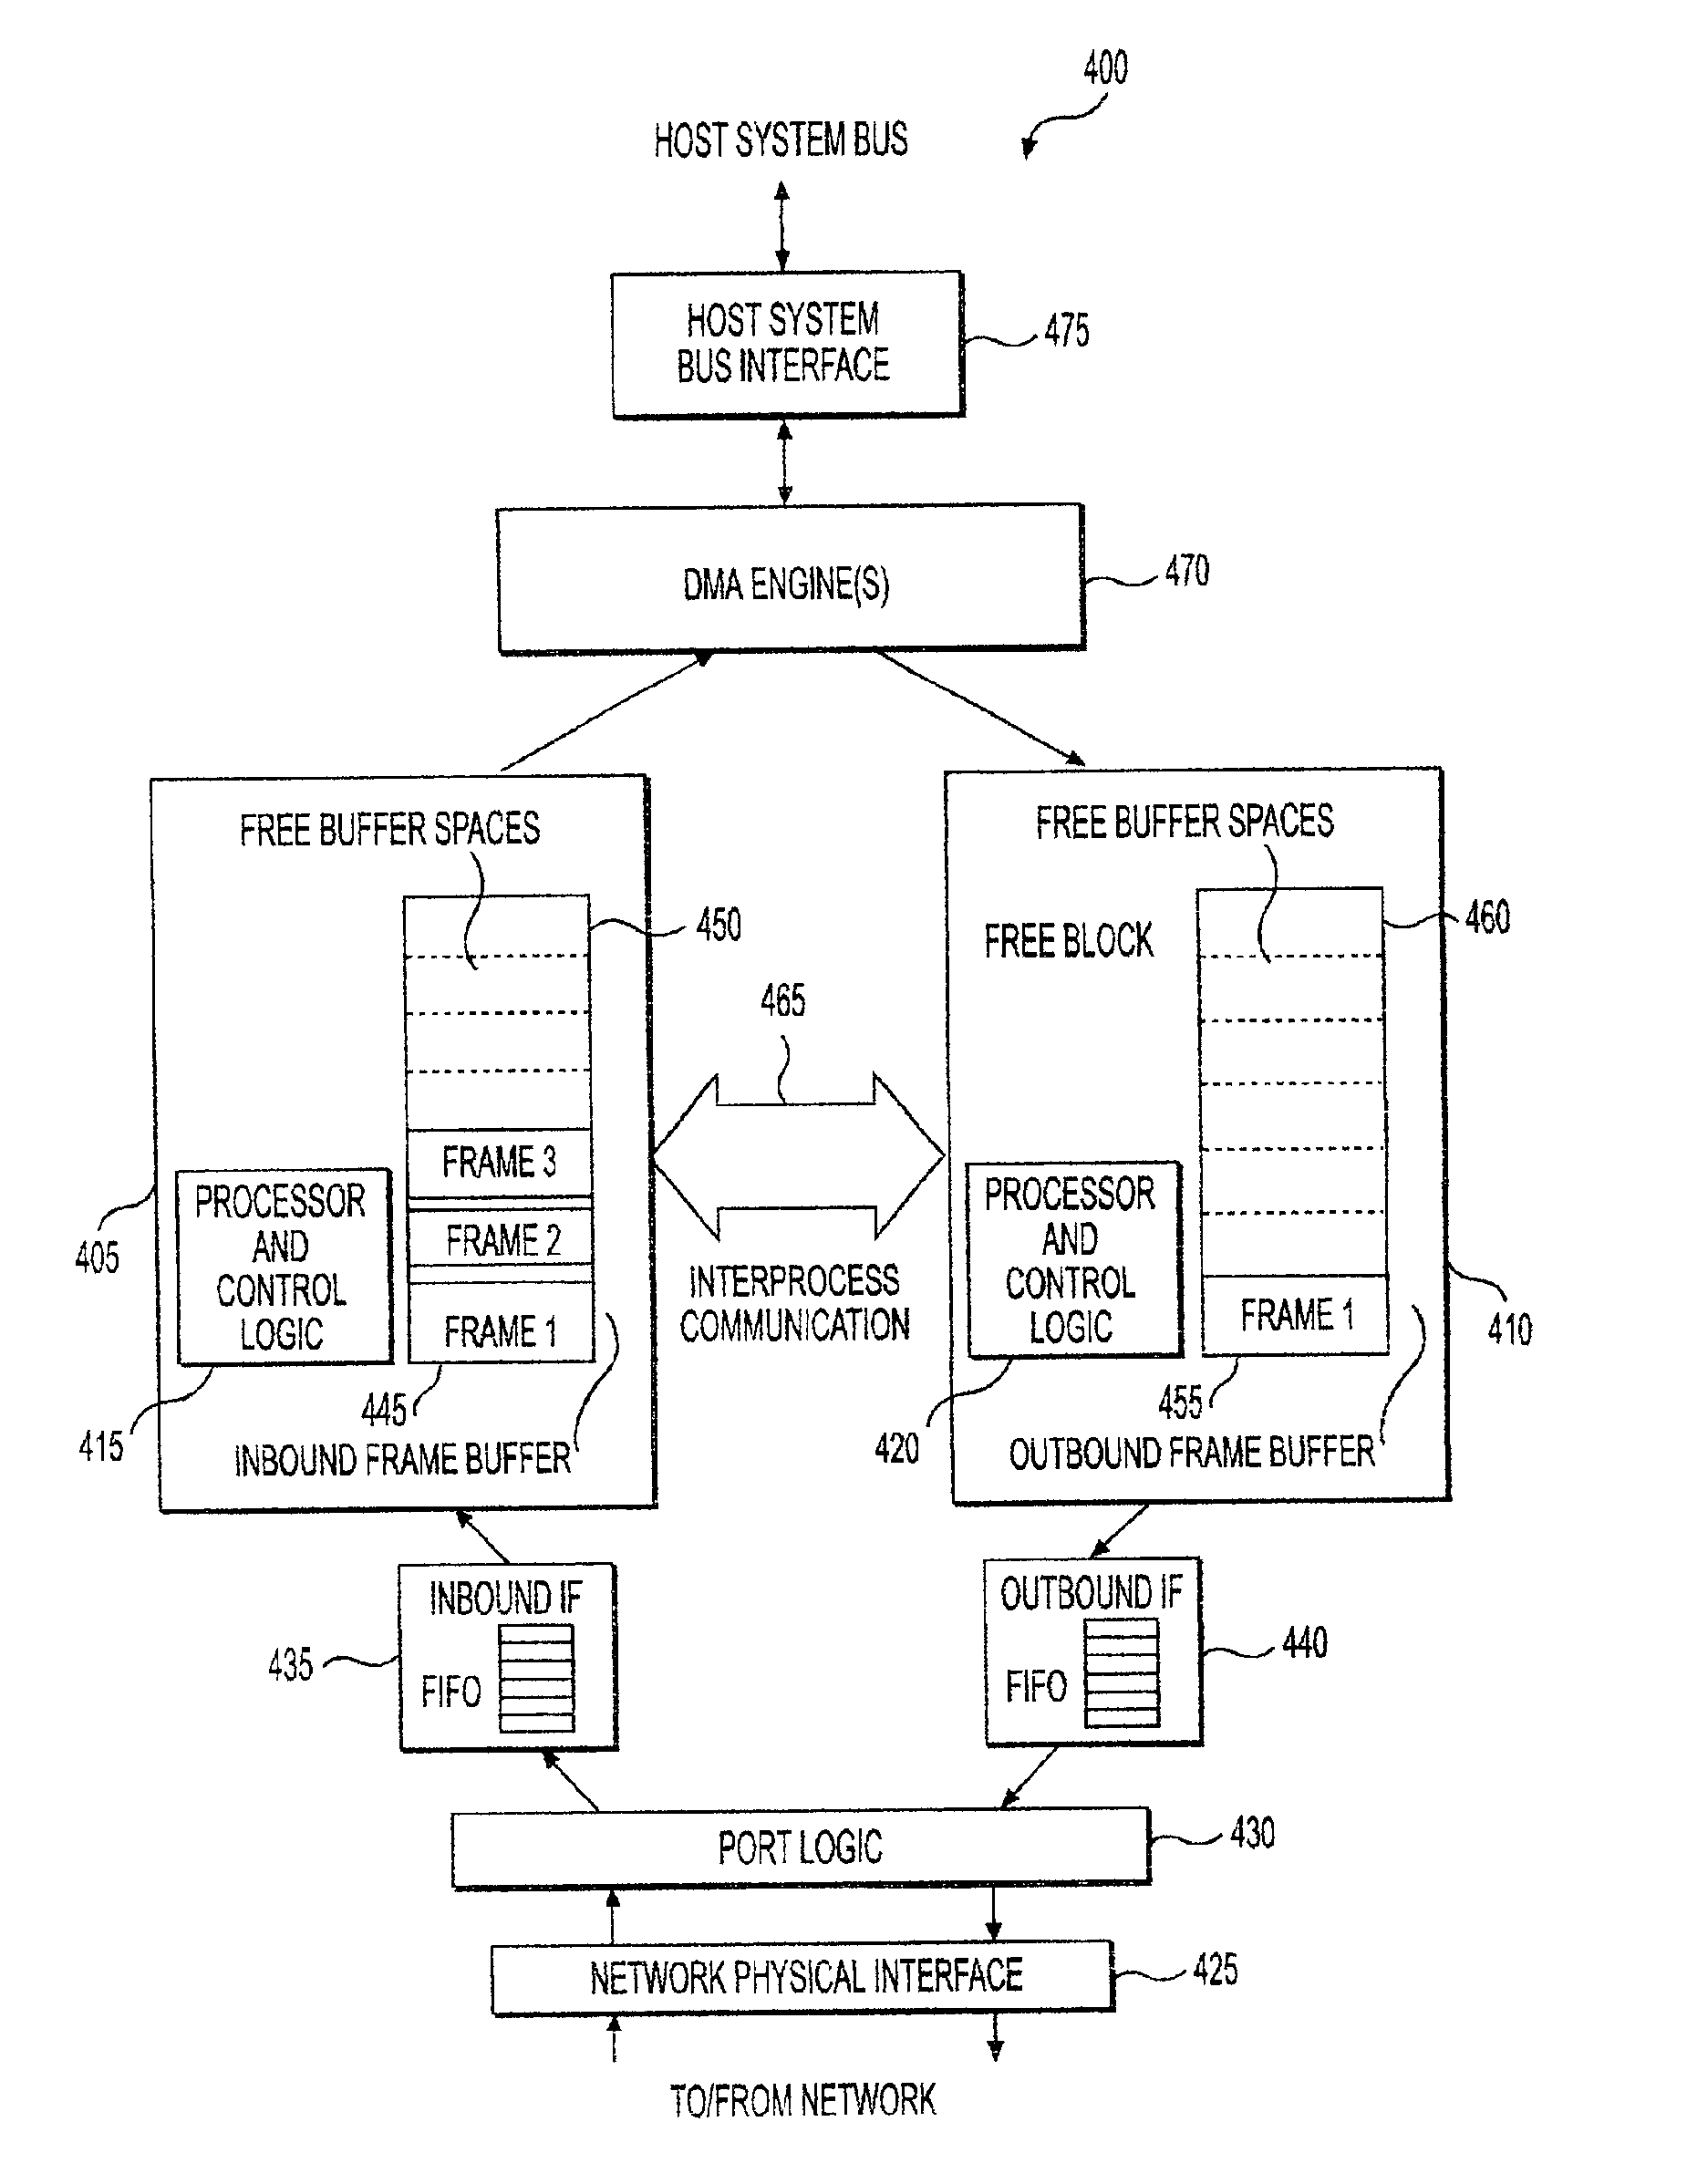 Dynamic memory allocation between inbound and outbound buffers in a protocol handler